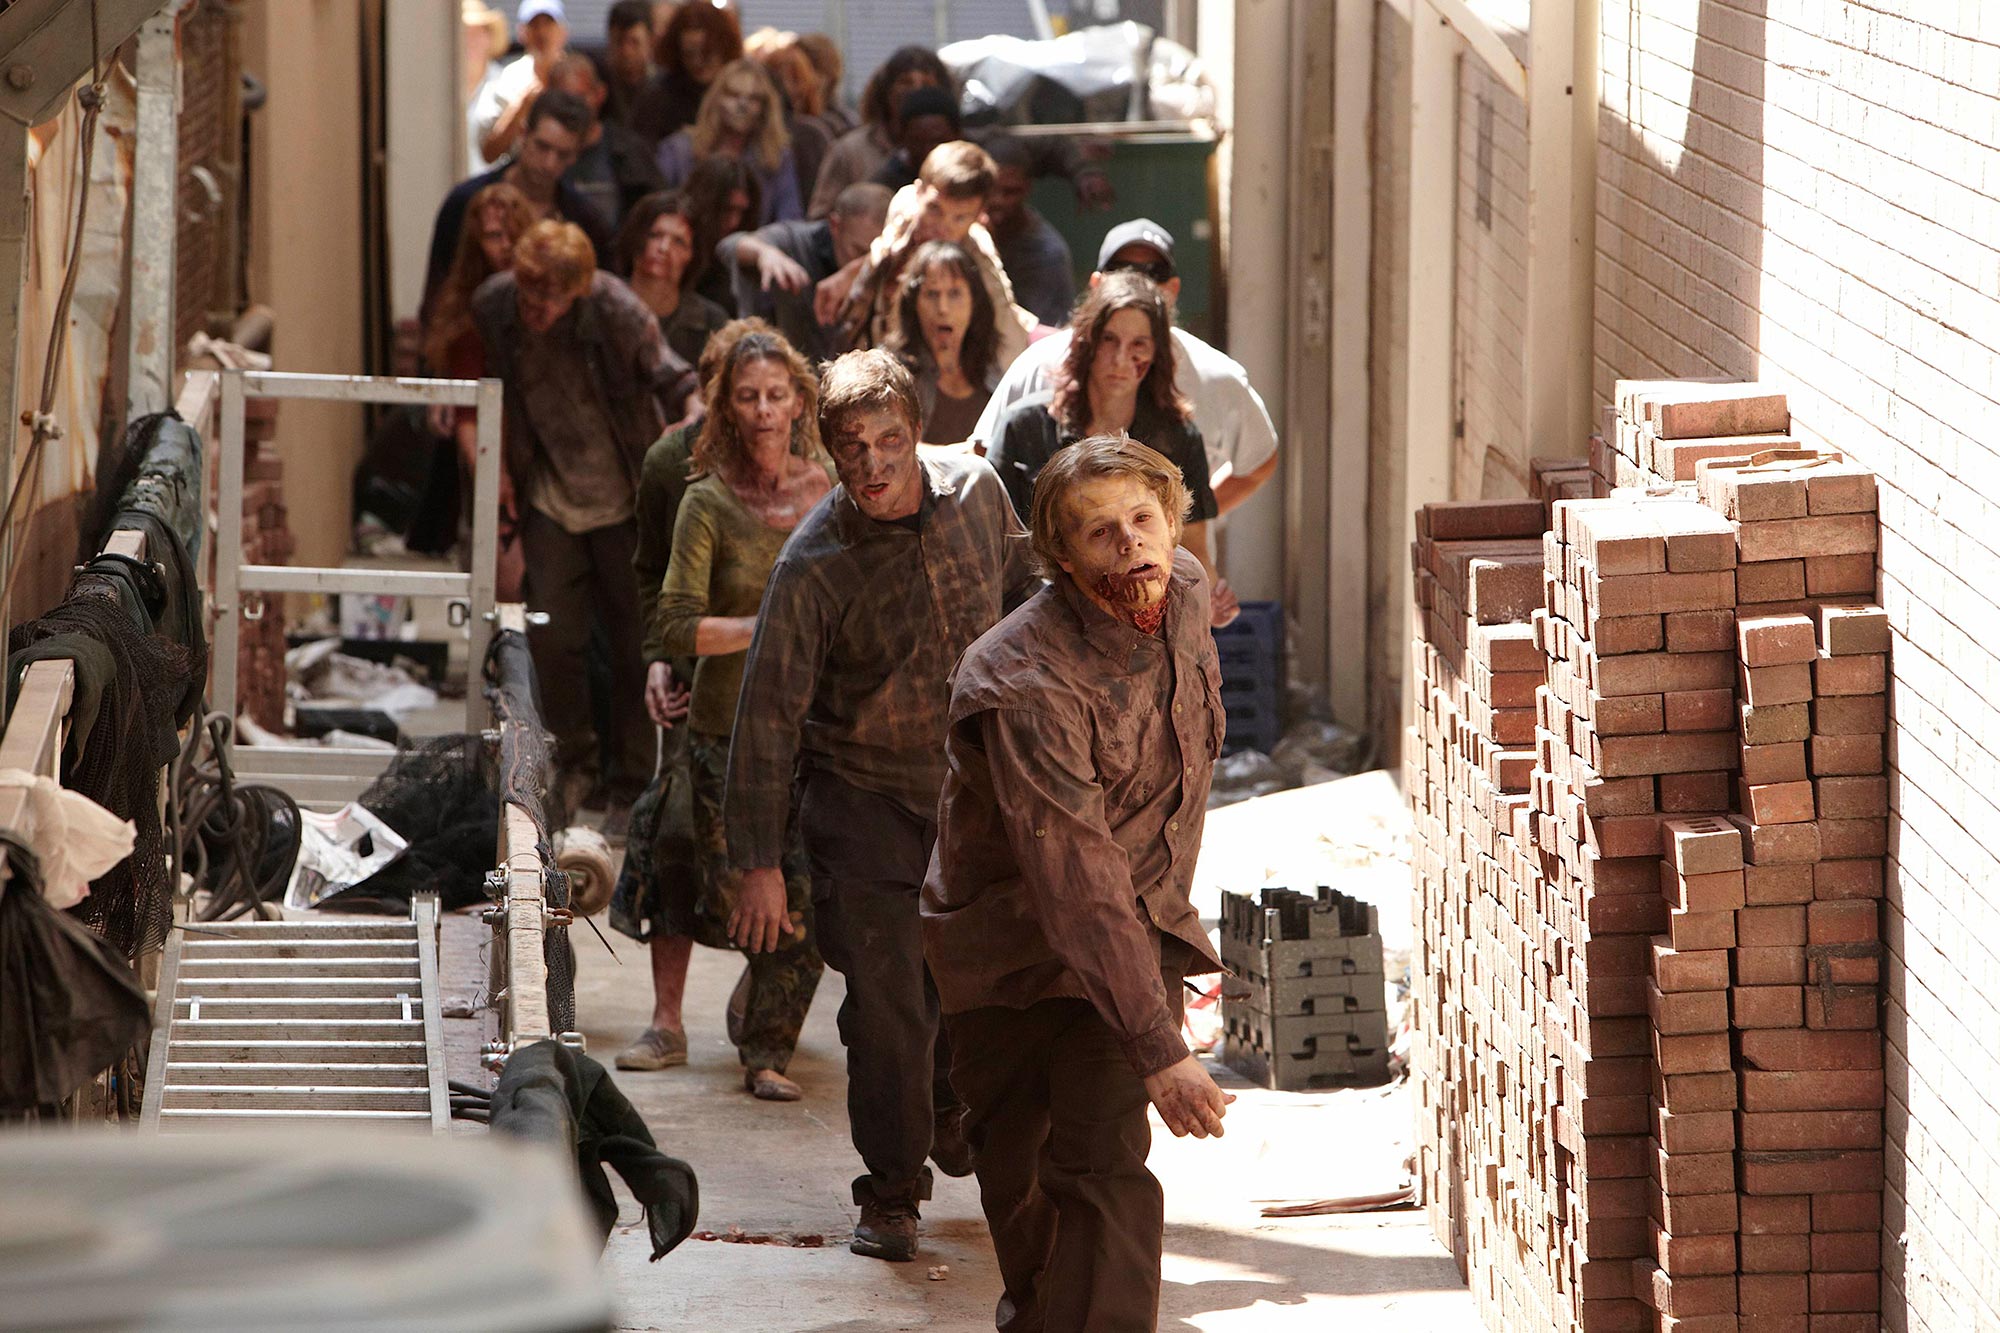 Zombies from the first season of The Walking Dead